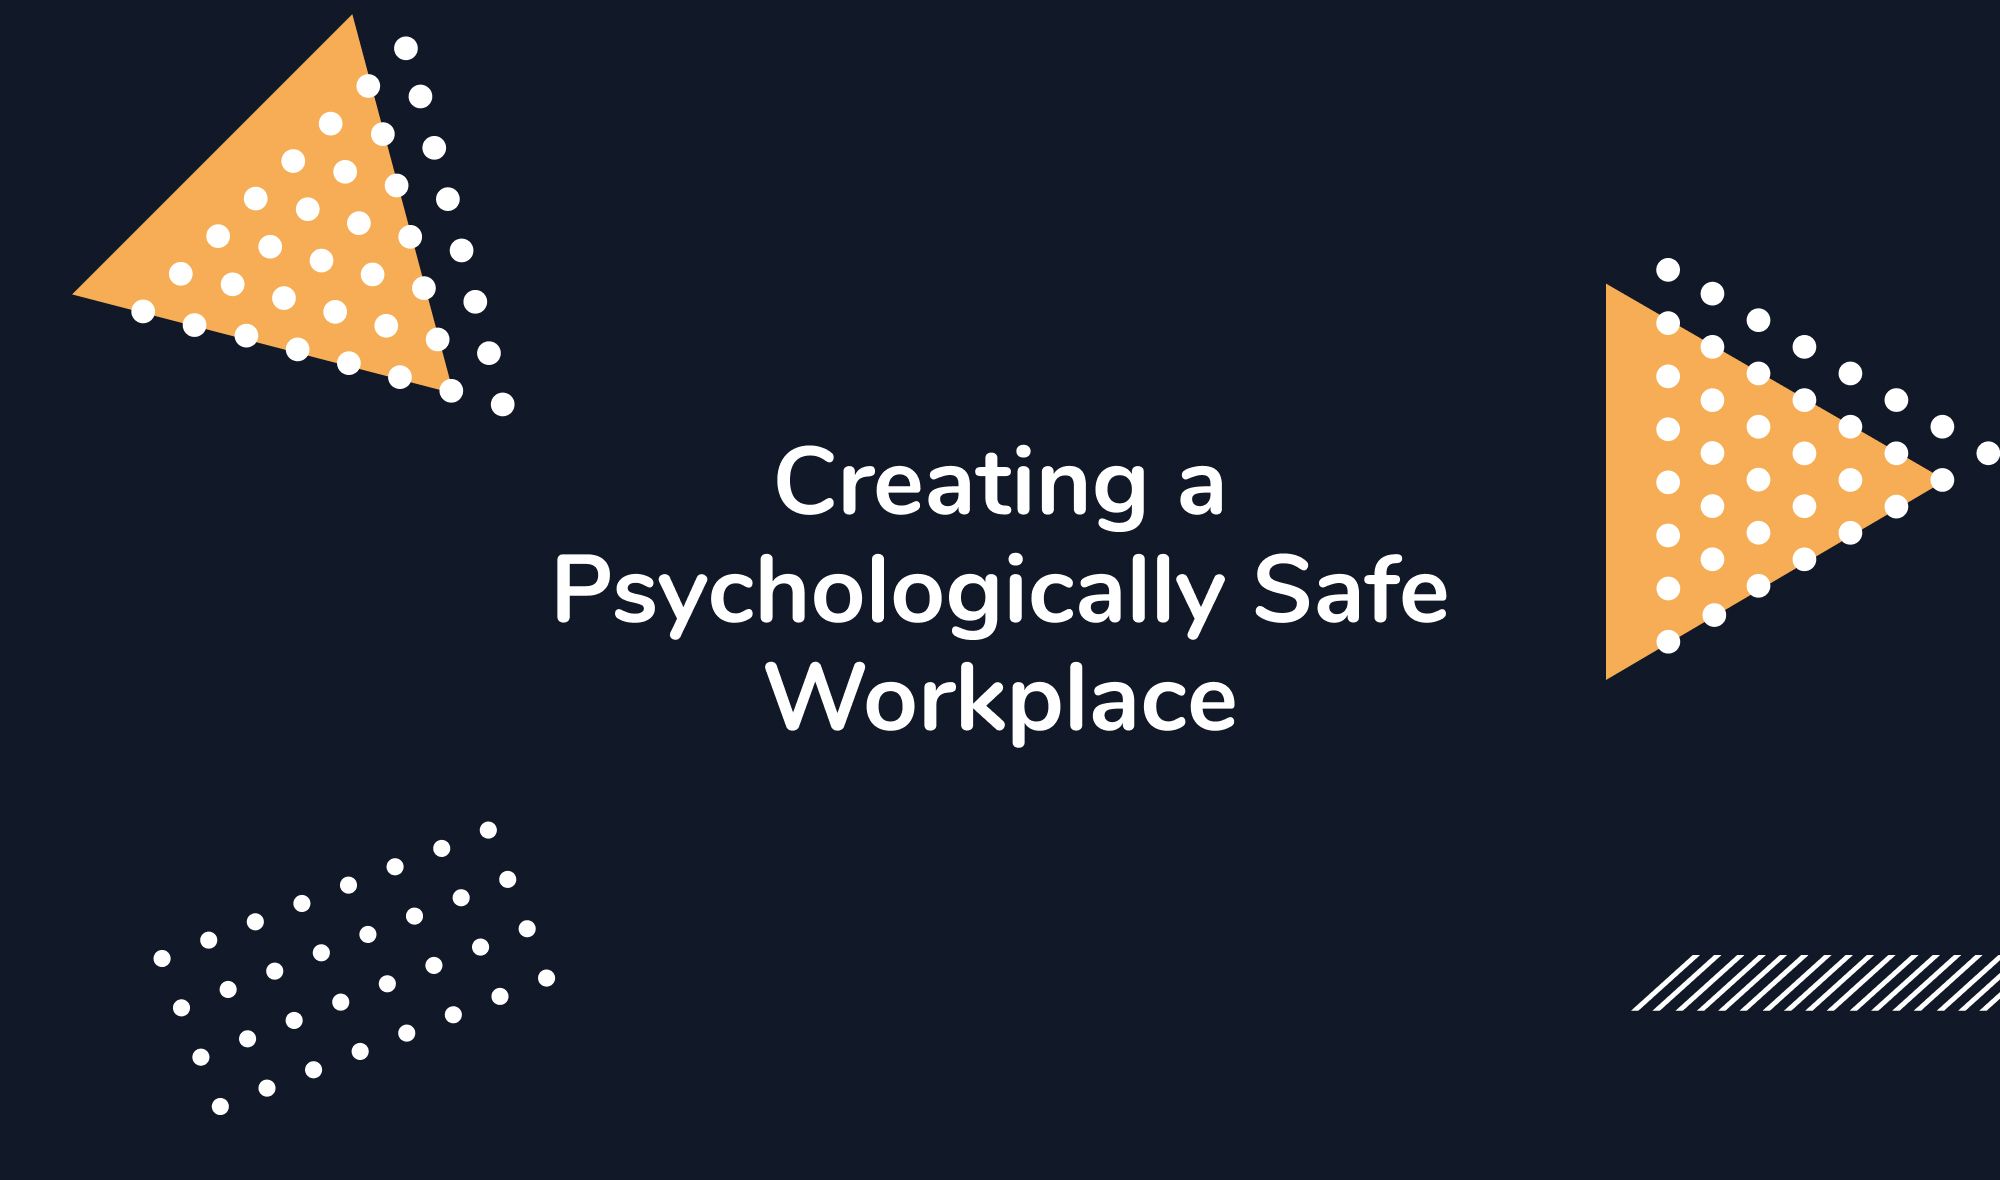 Creating a Psychologically Safe Workplace: A Step-By-Step Guide